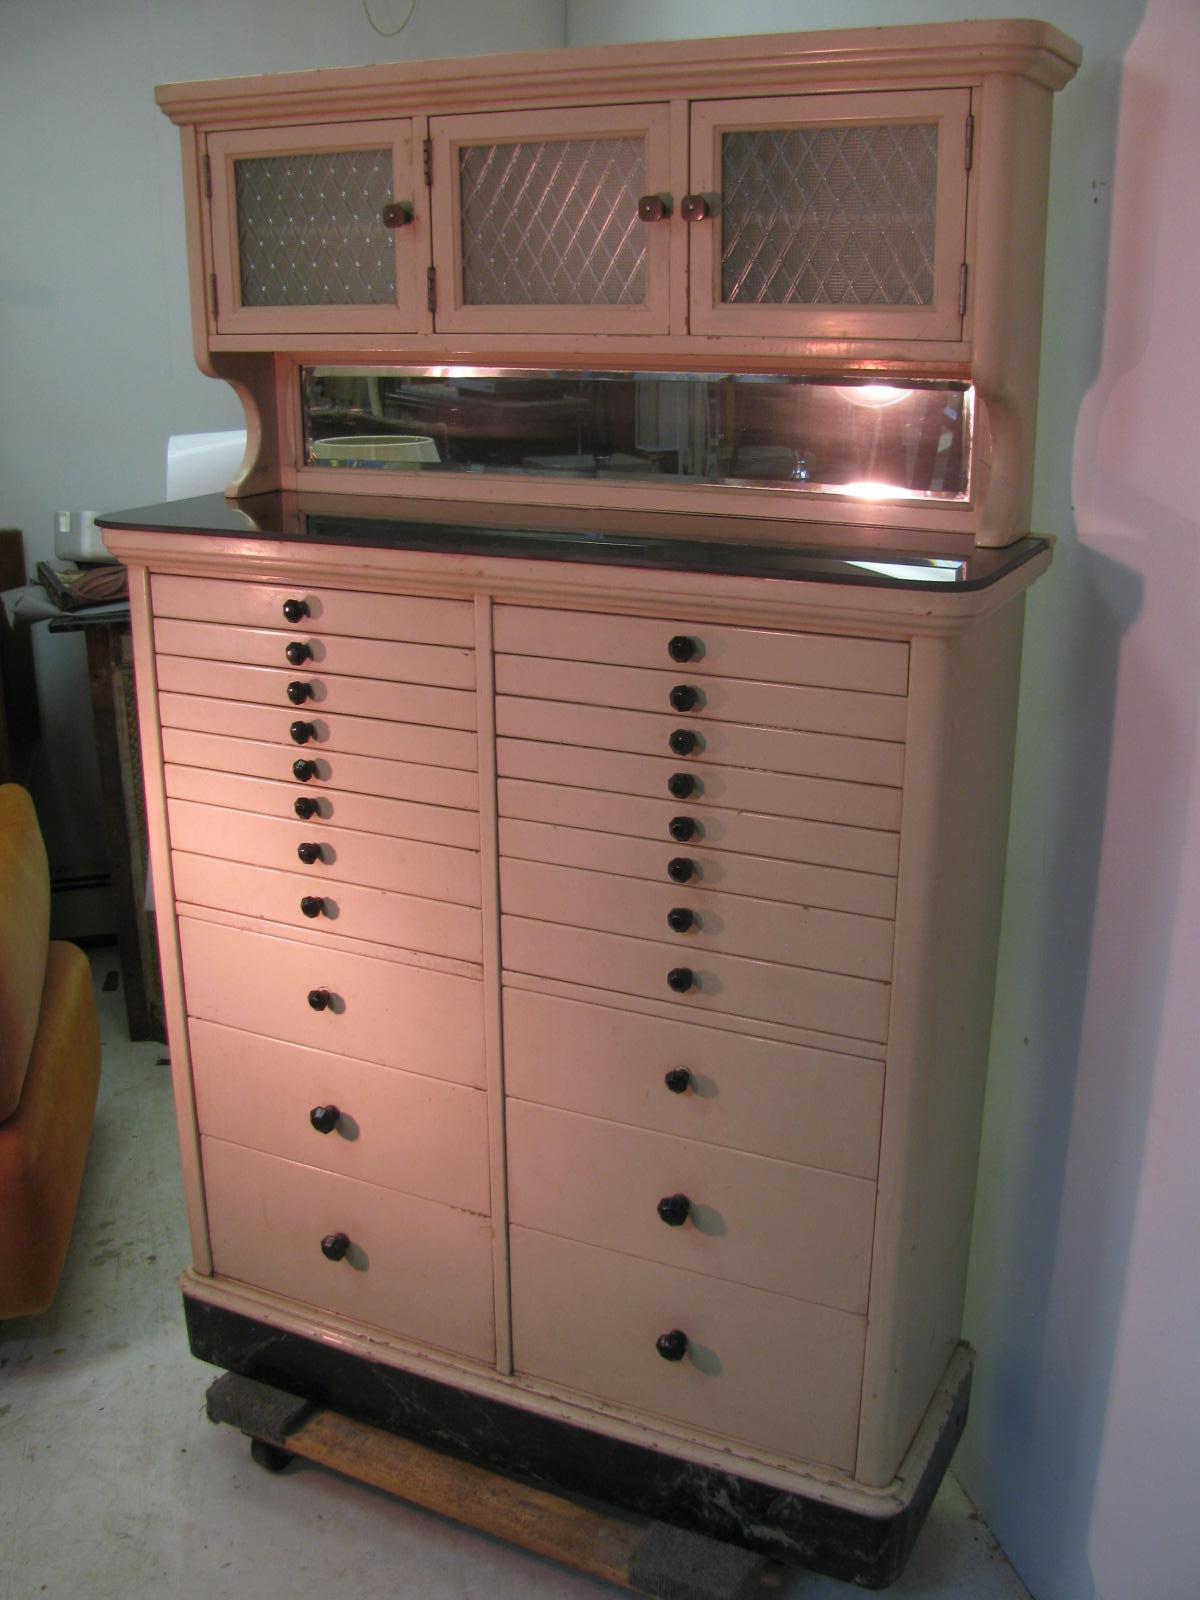 Beautiful and amazing cabinet built for the medical field, specifically dentists. 22 drawers with a 3 door cabinet up top with textured glass. Original paint with a 2 piece black glass shelf. All drawers open easily with black glass knobs and